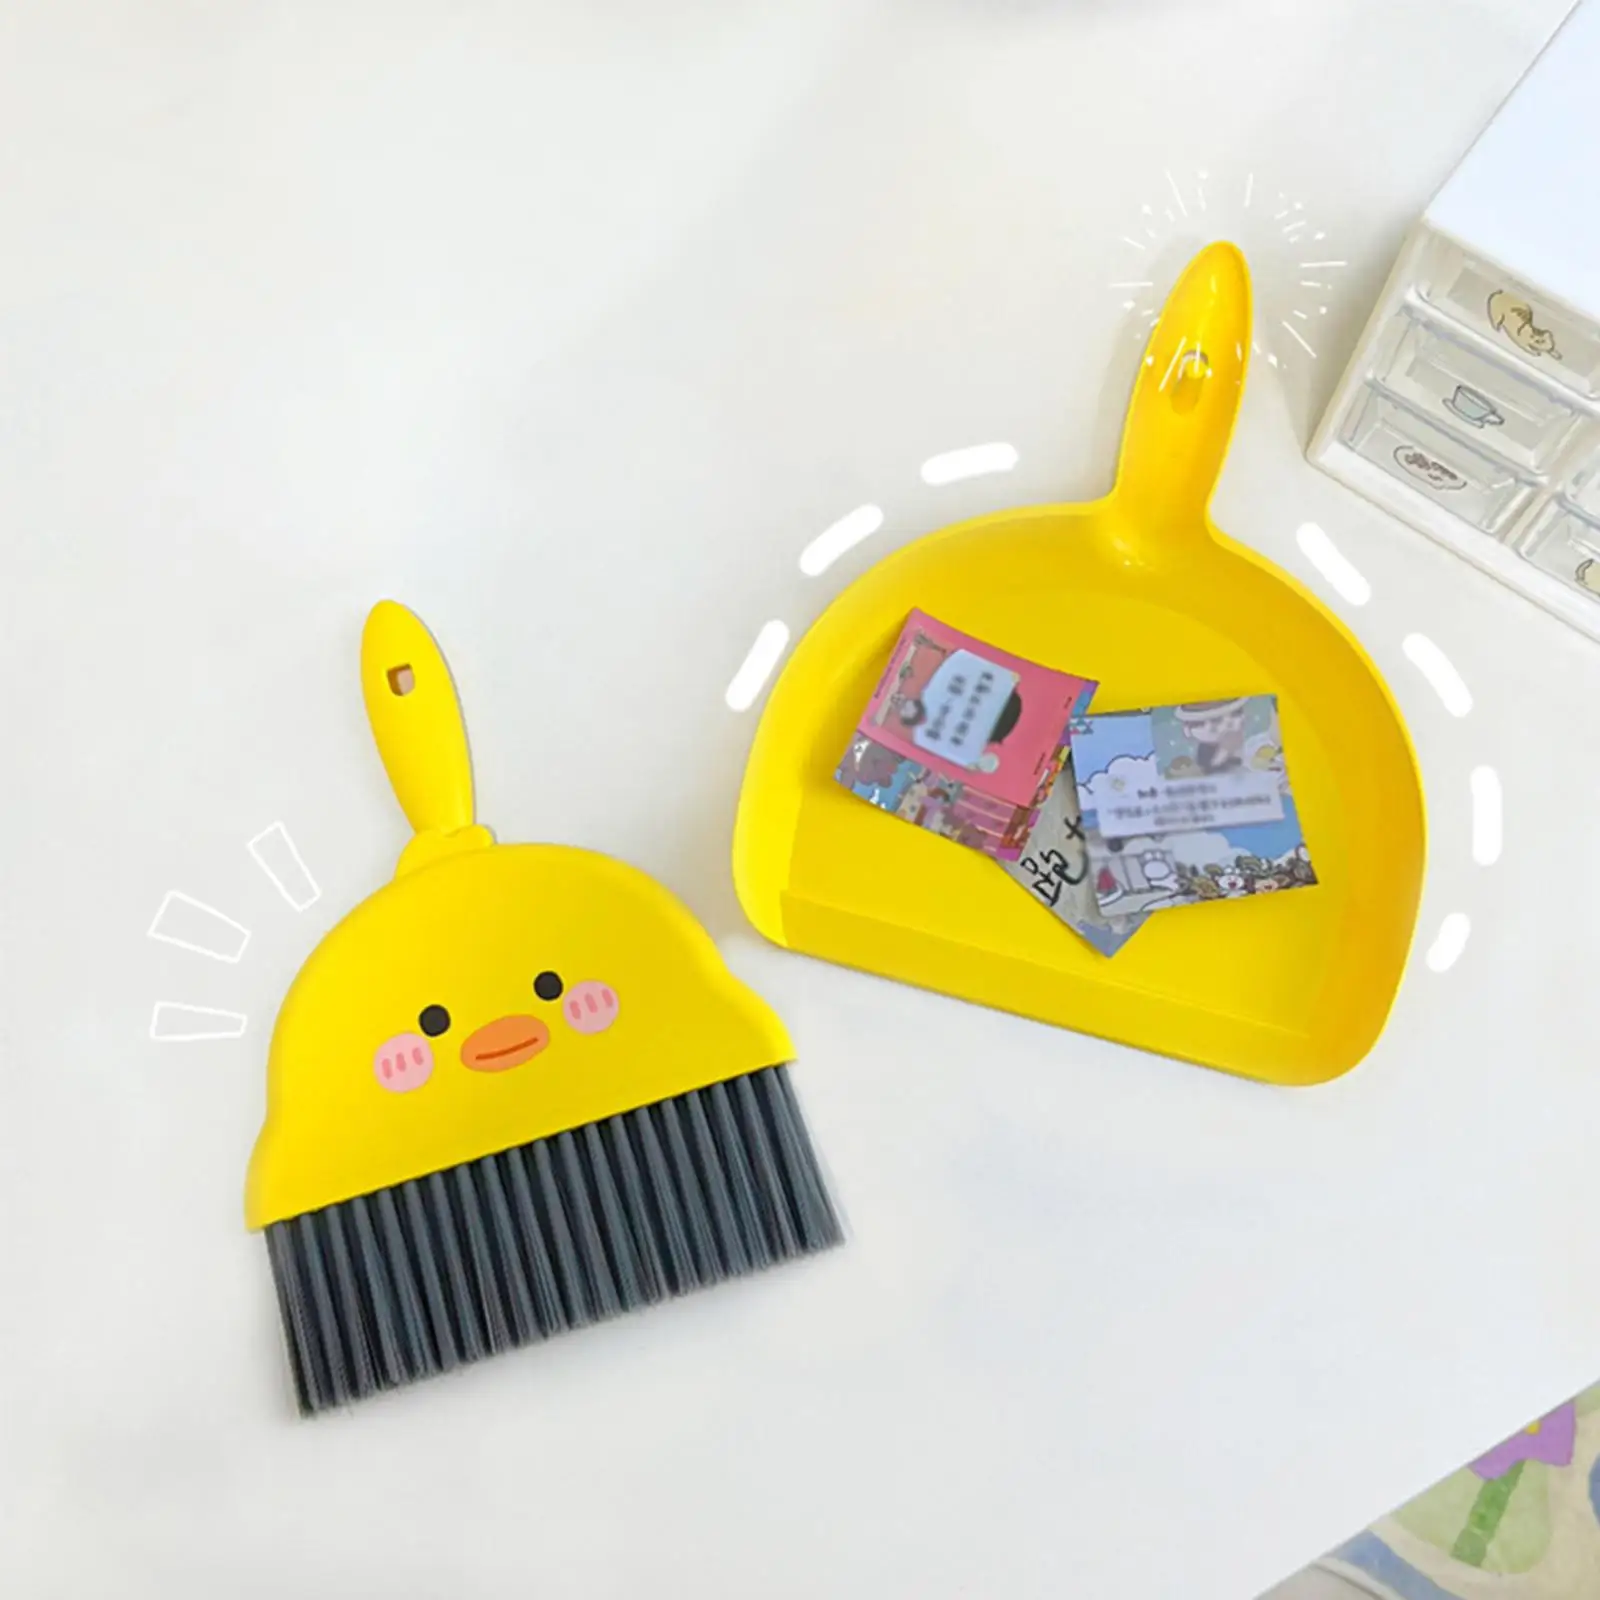 Mini Broom and Dustpan Set Desktop Mini Broom Dustpan Suit for Sofa Cleaning Bed for Girls Boys Housekeeping Play Set Gift